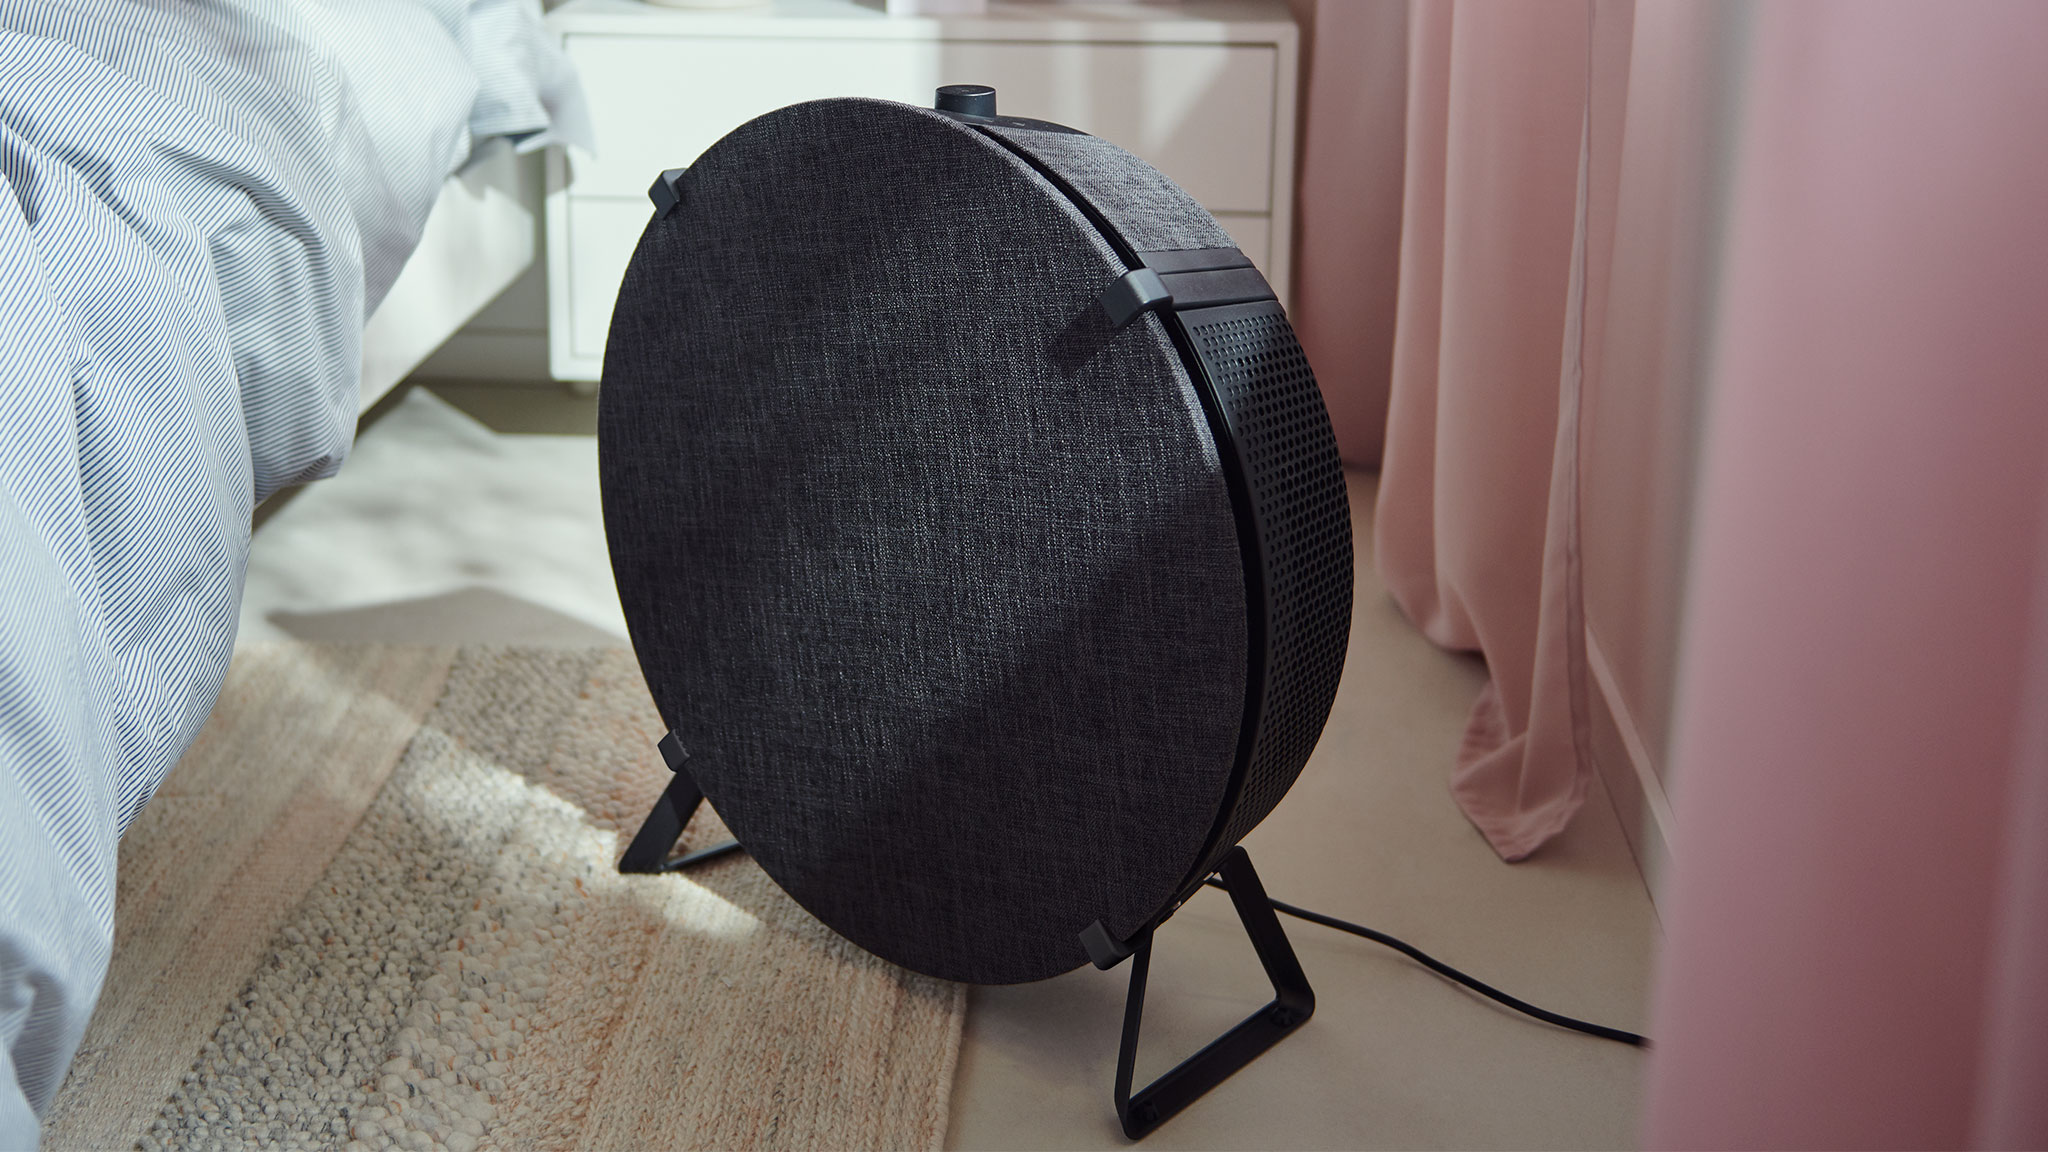 IKEA Starkvind: a smart air purifier from the furniture store